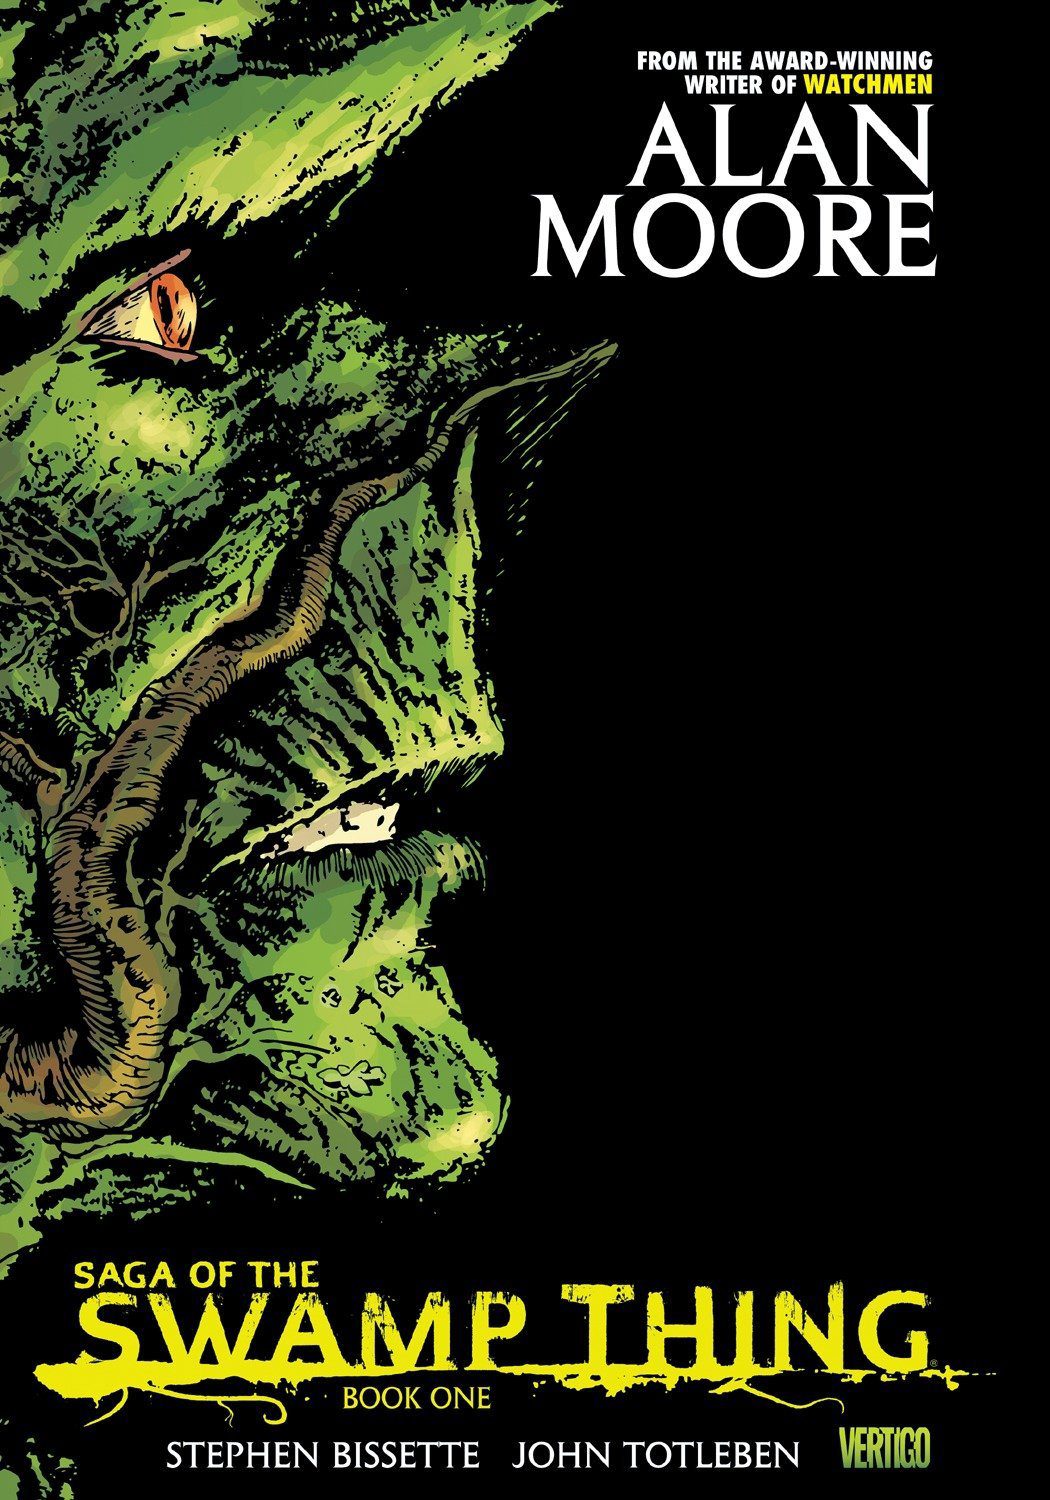 Saga of the Swamp Thing book 1 book cover